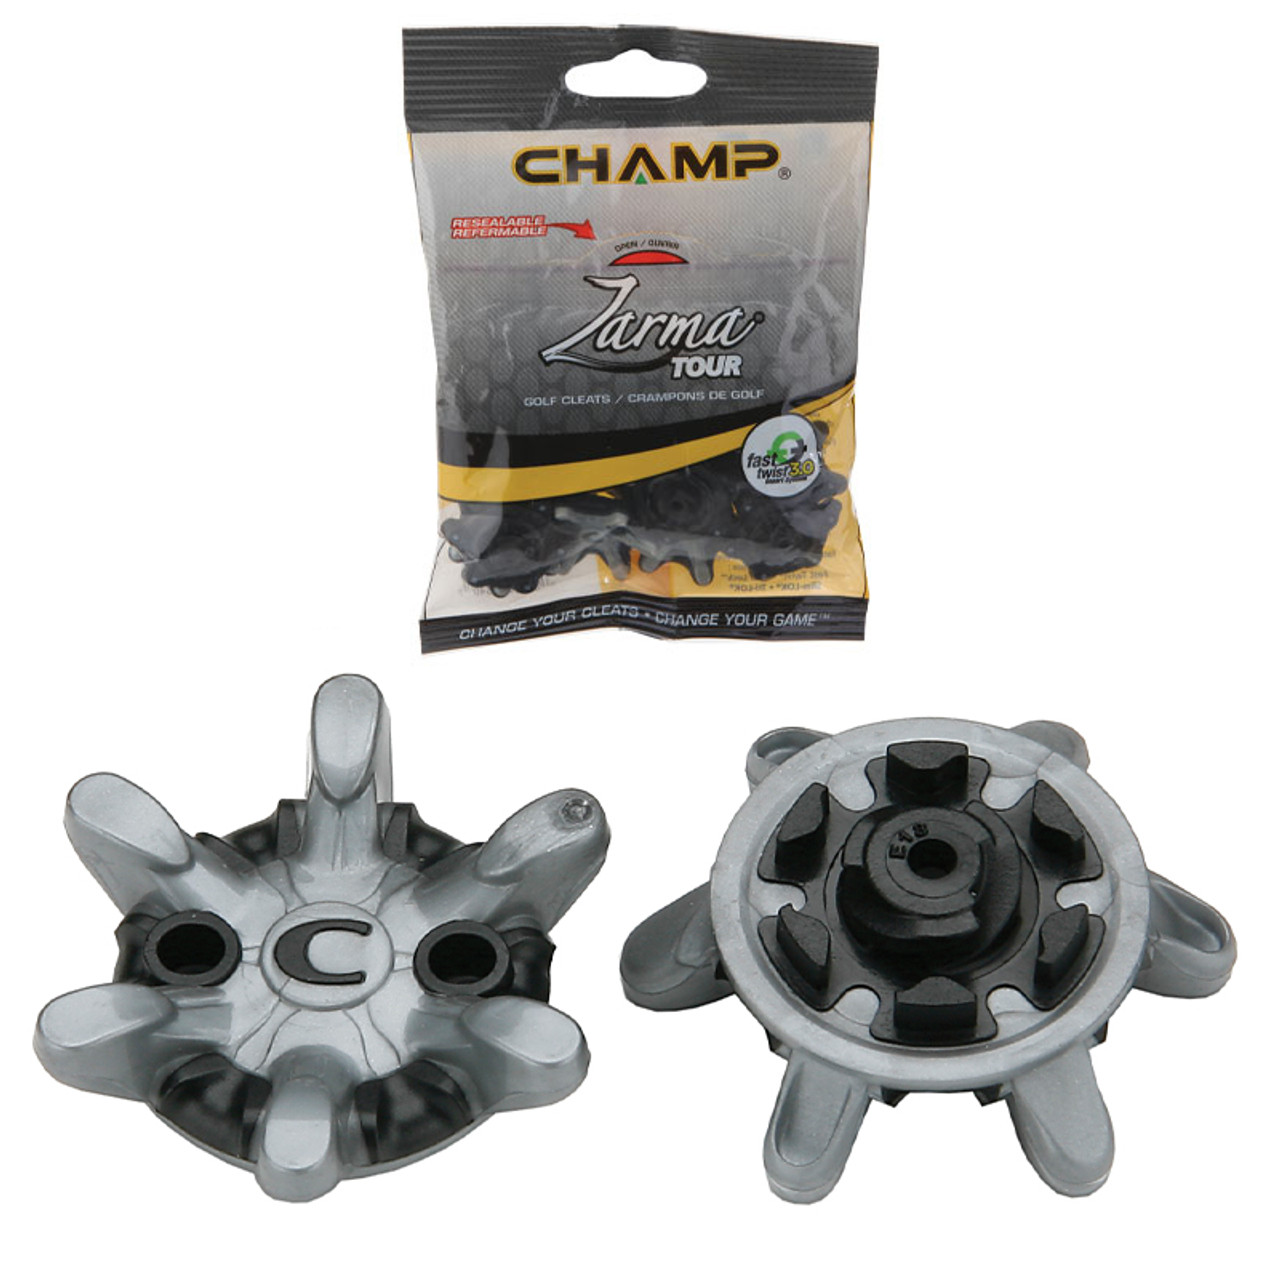 Track Spikes – champspikes